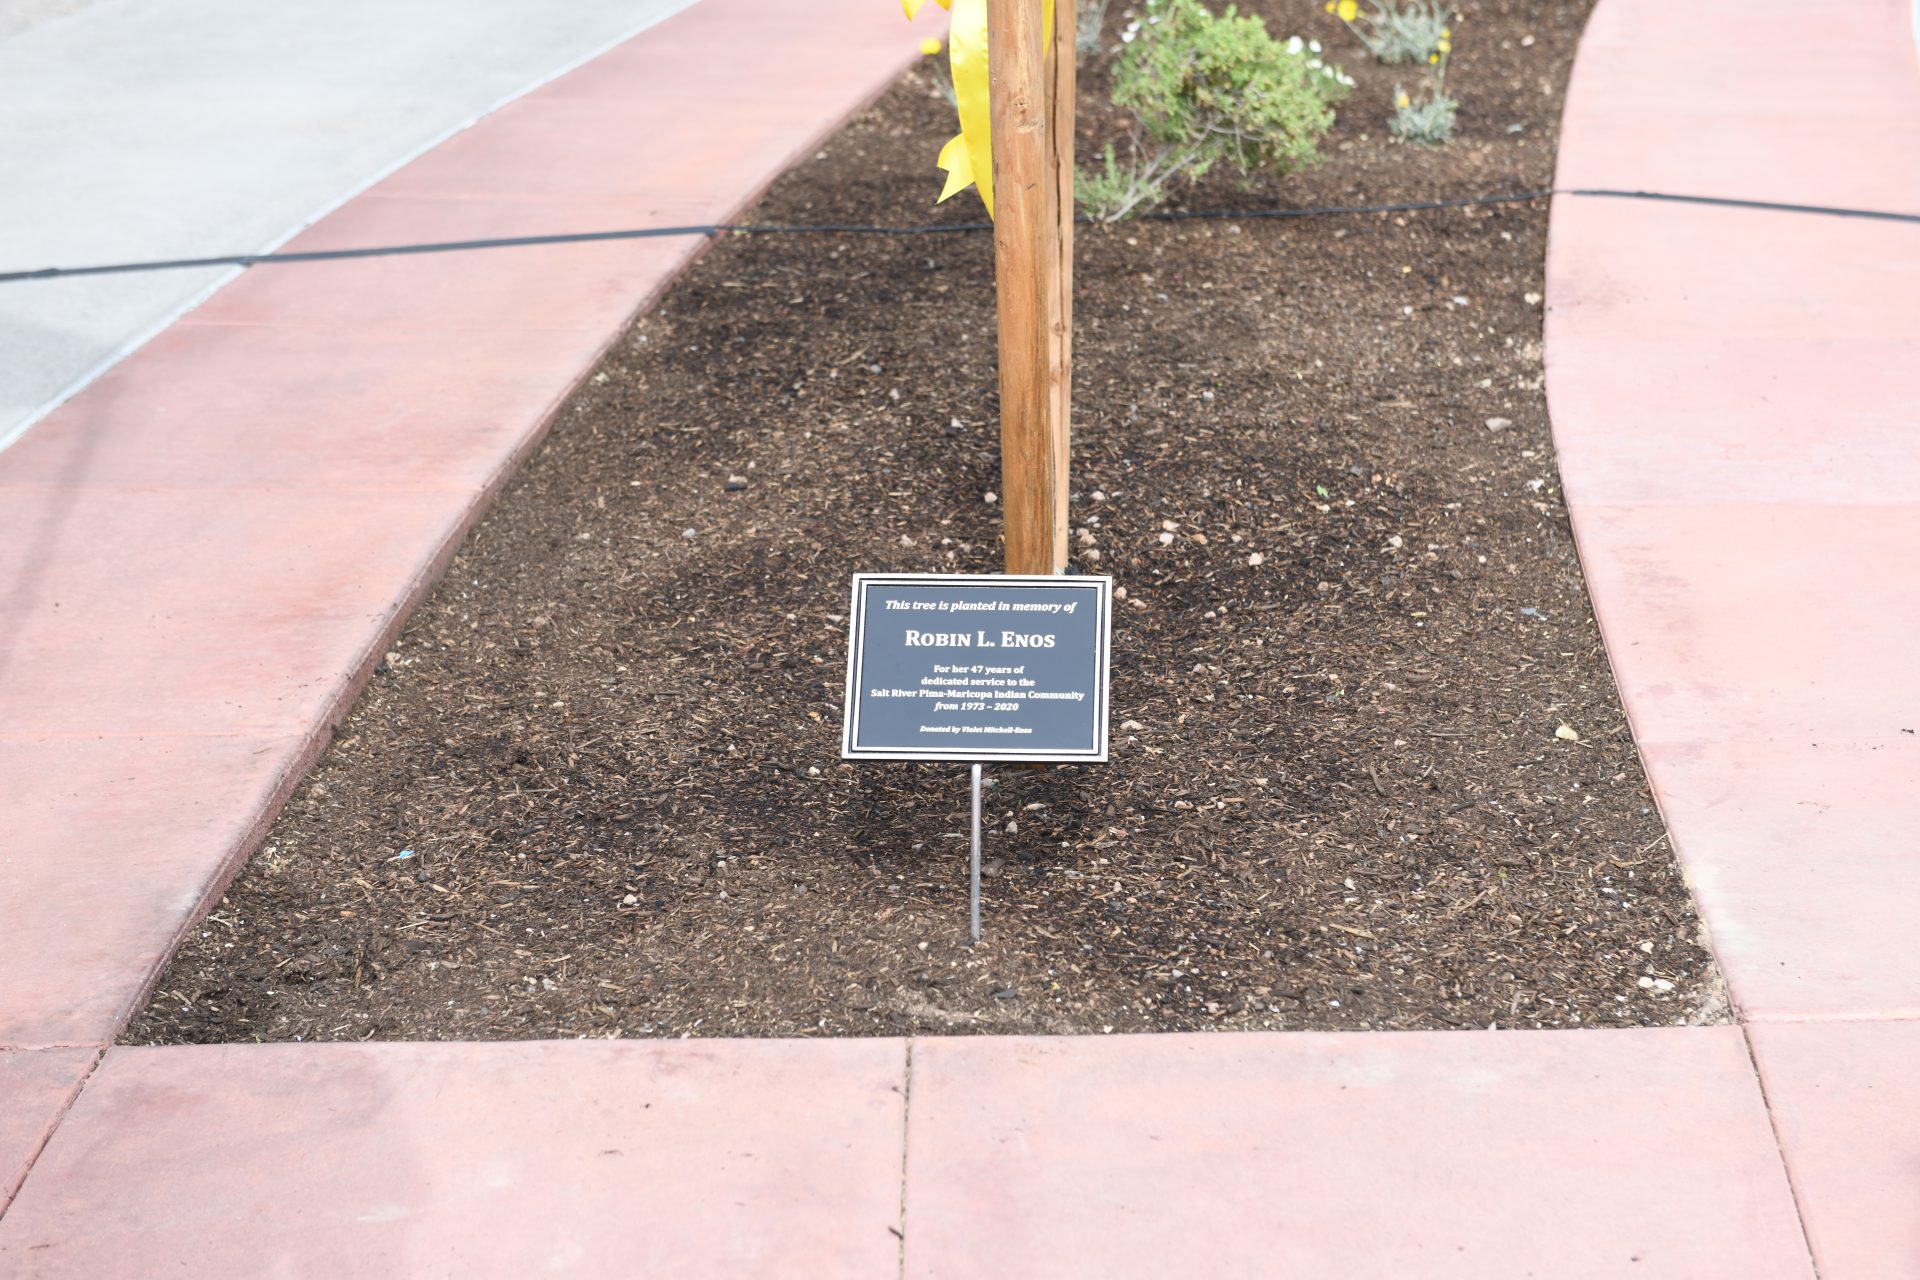 Former HR Director Robin Enos Honored With Ash Tree Dedication